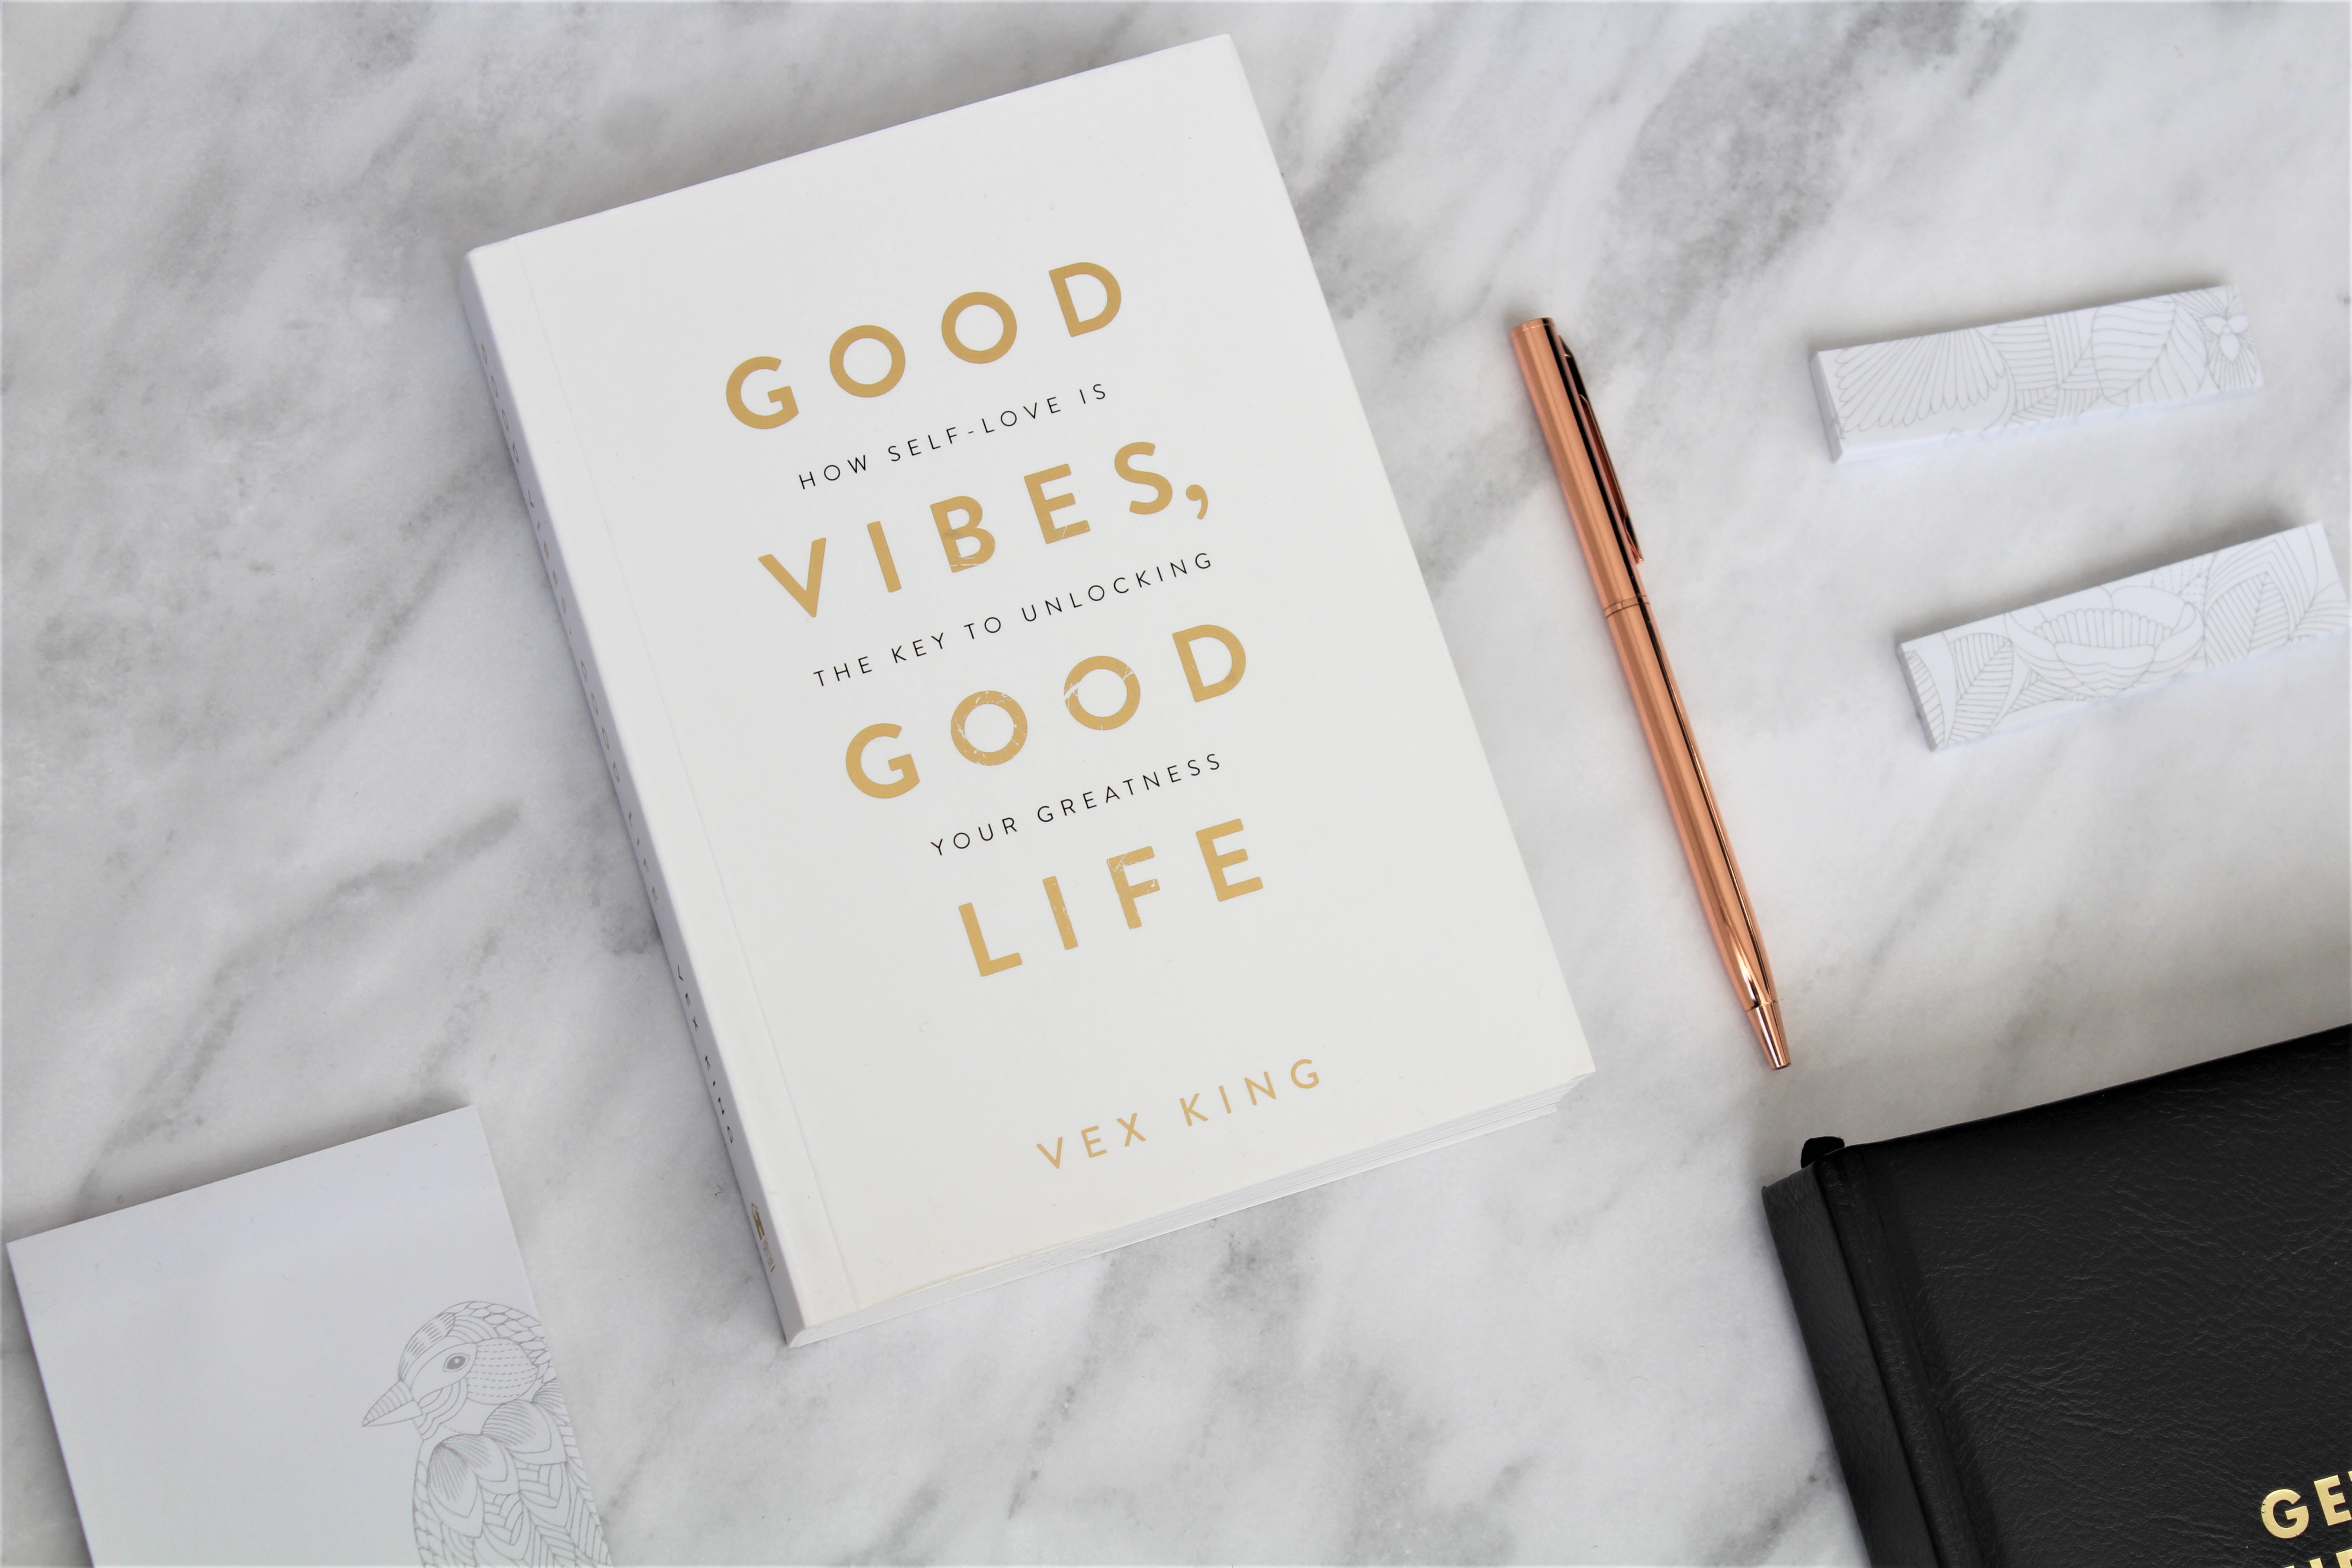 Good Vibes, Good Life - Vex King - Kind Culture review